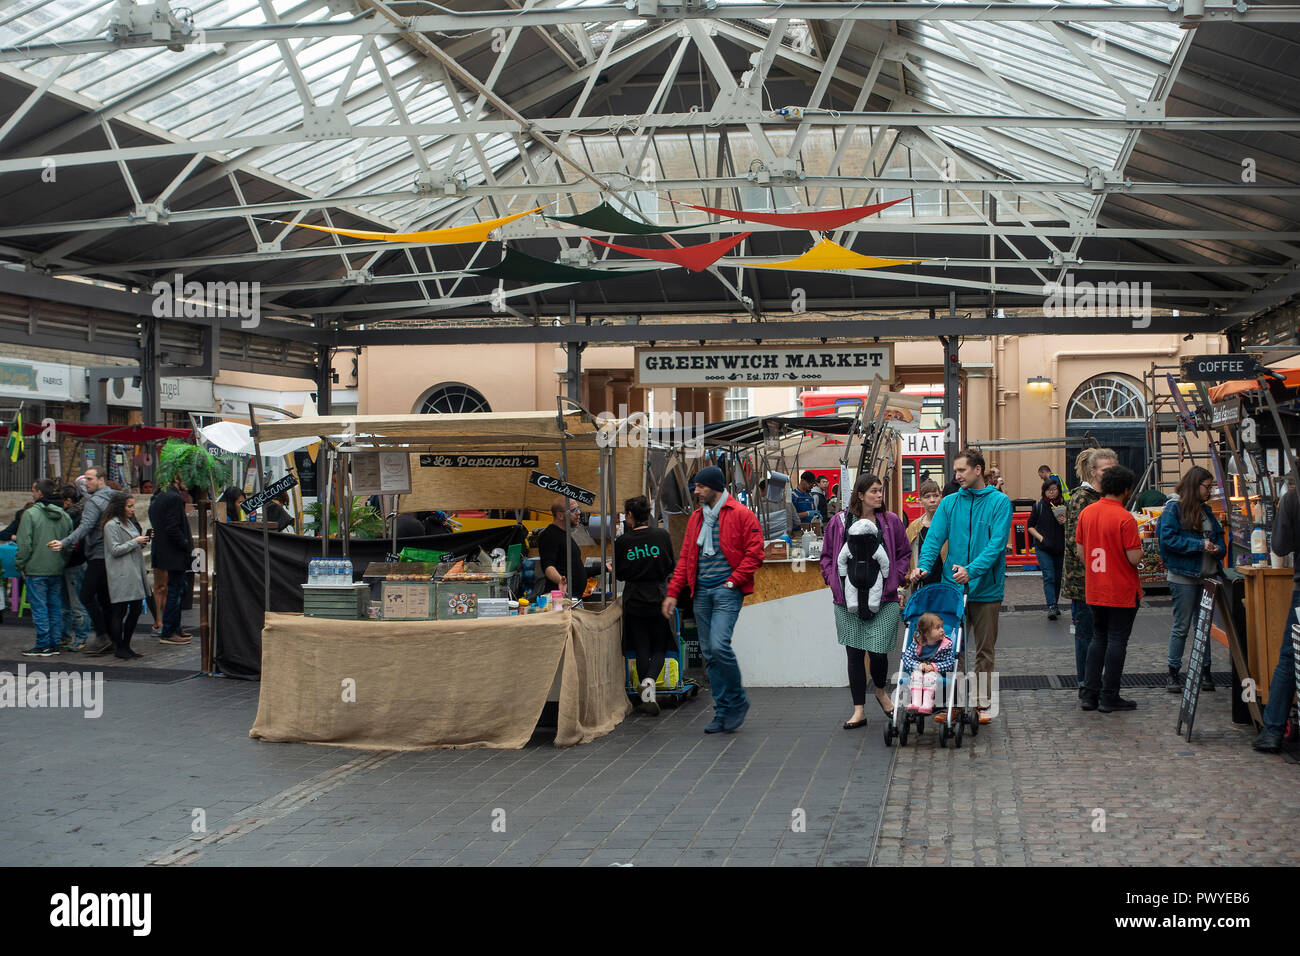 People Browsing and Shopping in the Famous Indoor Market at Greenwich London England United Kingdom UK Stock Photo